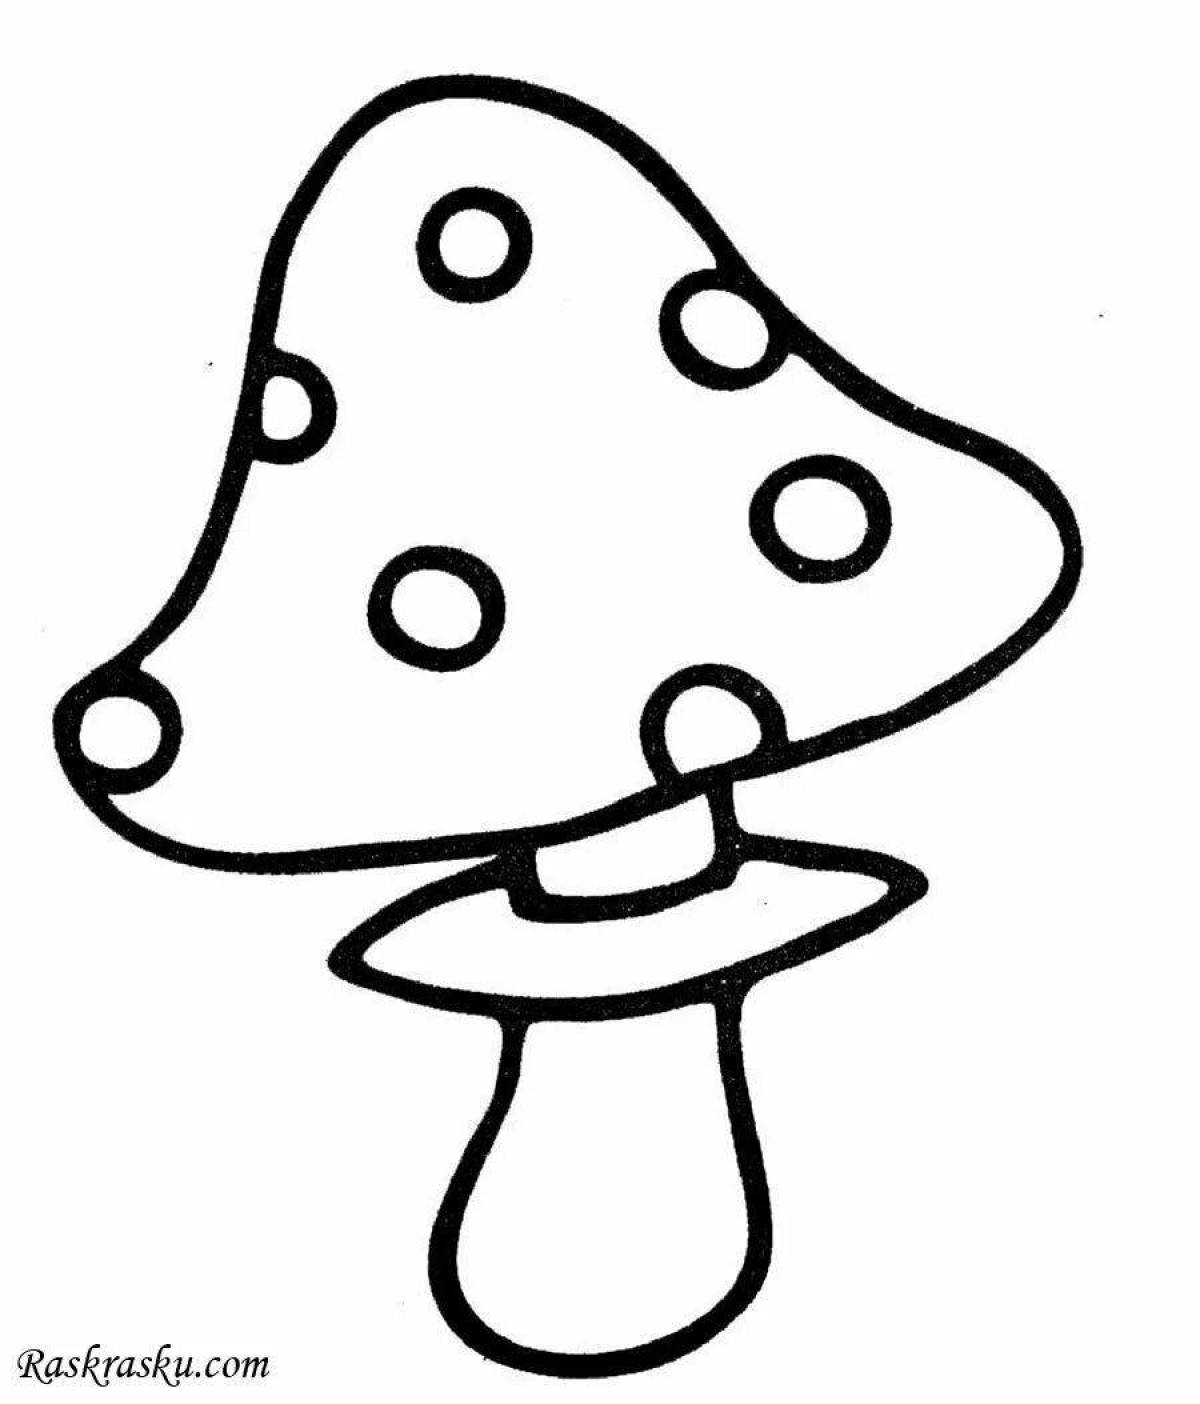 Ideal fly agaric drawing for schoolchildren